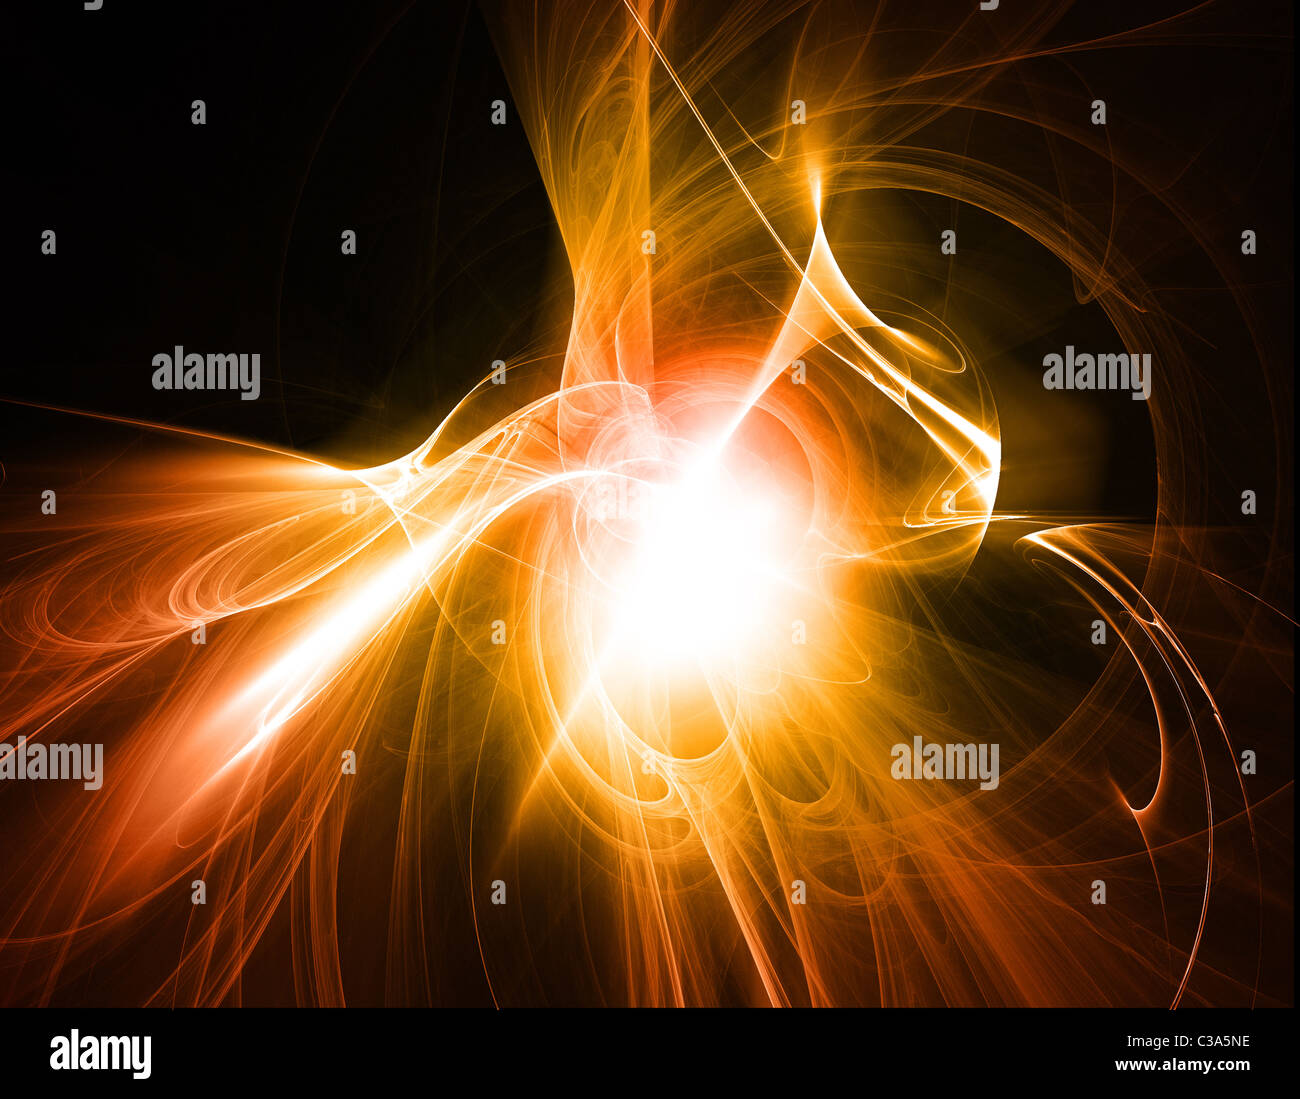 Abstract background with fiery effect Stock Photo